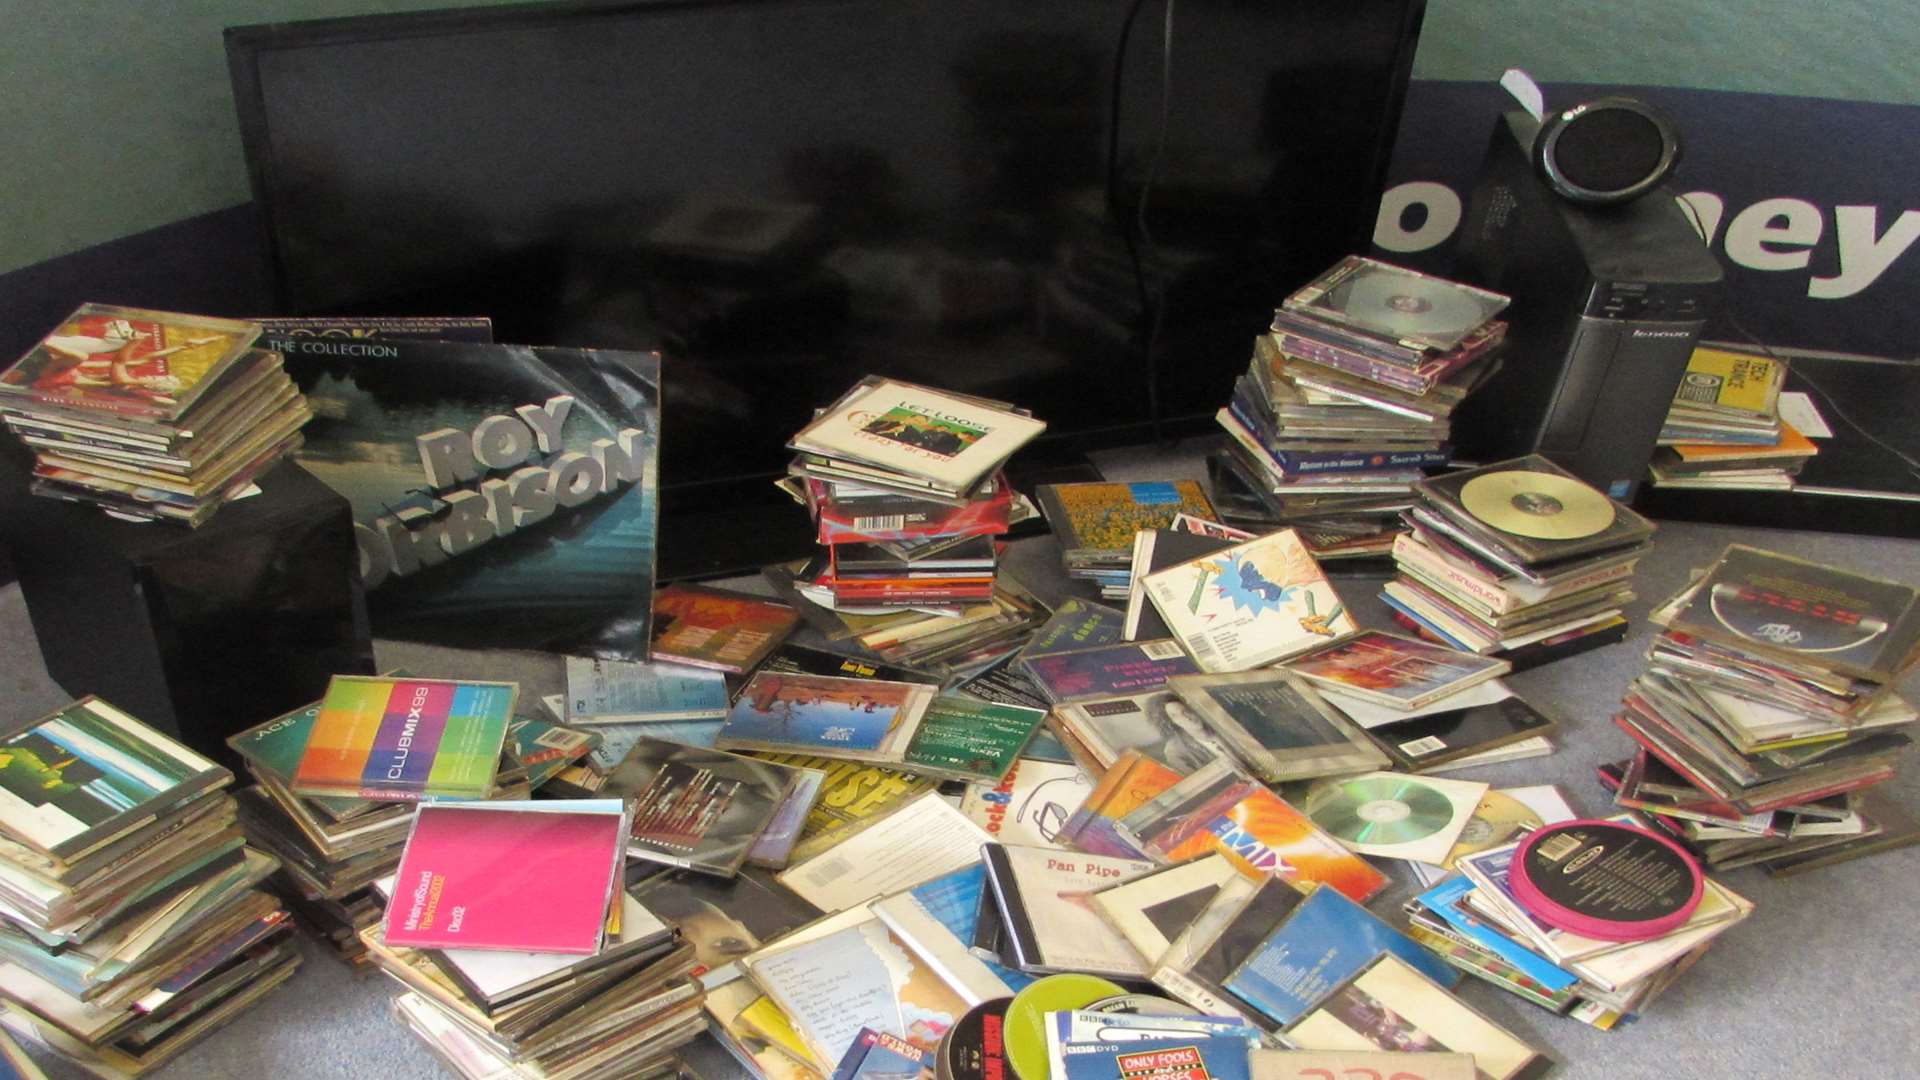 The pensioner's CD collection was seized after he ignored pleas to turn his music down